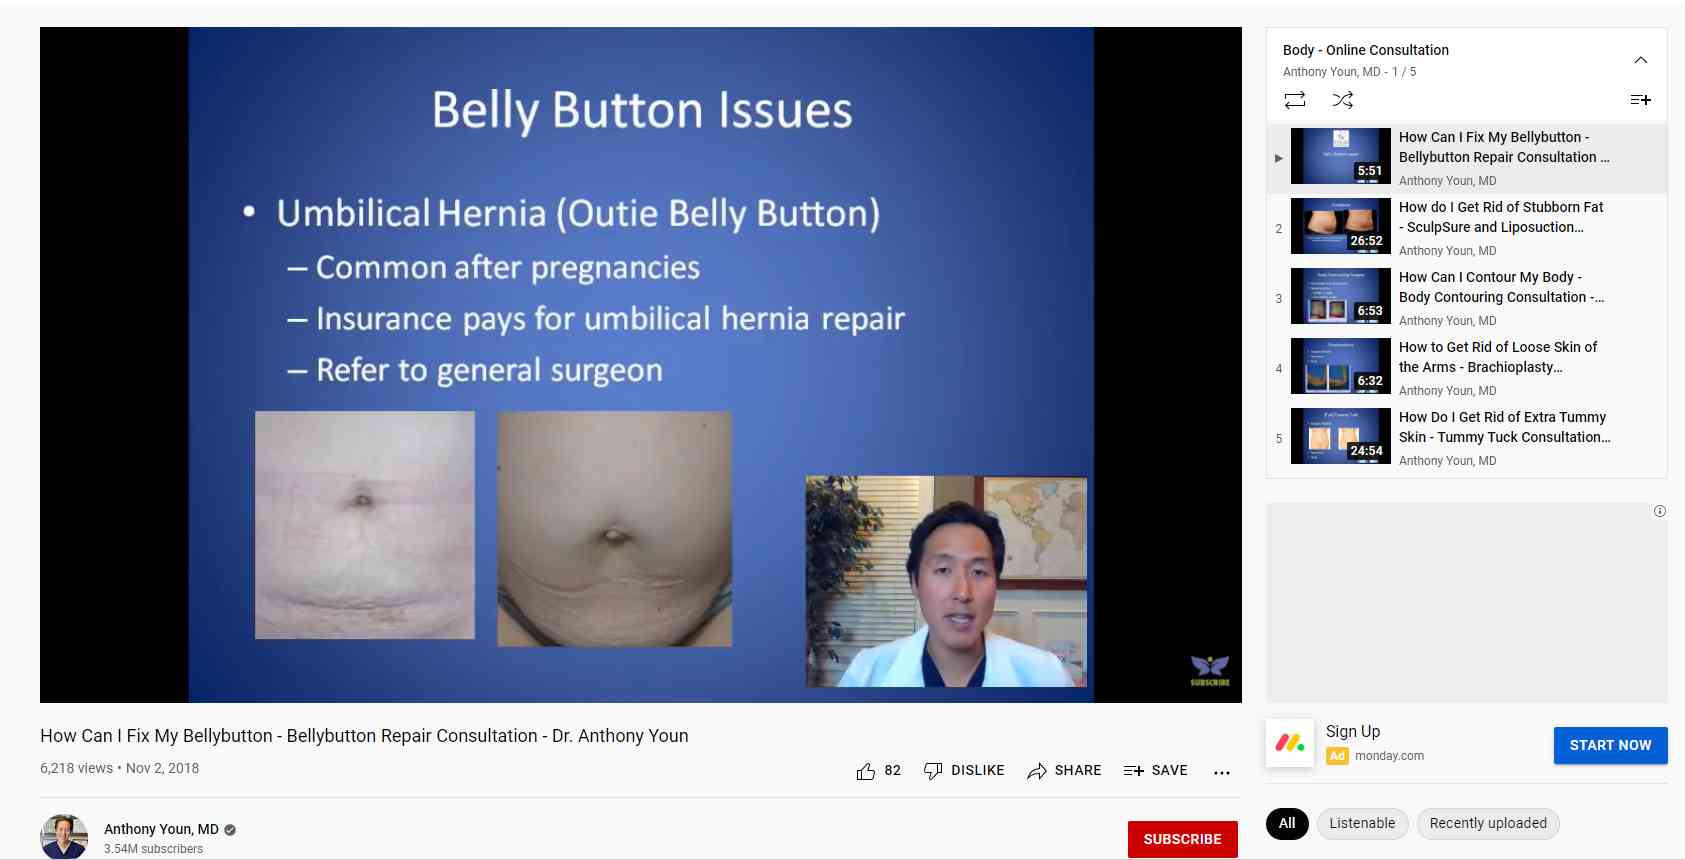 Plastic surgeon using Youtube to share educational content